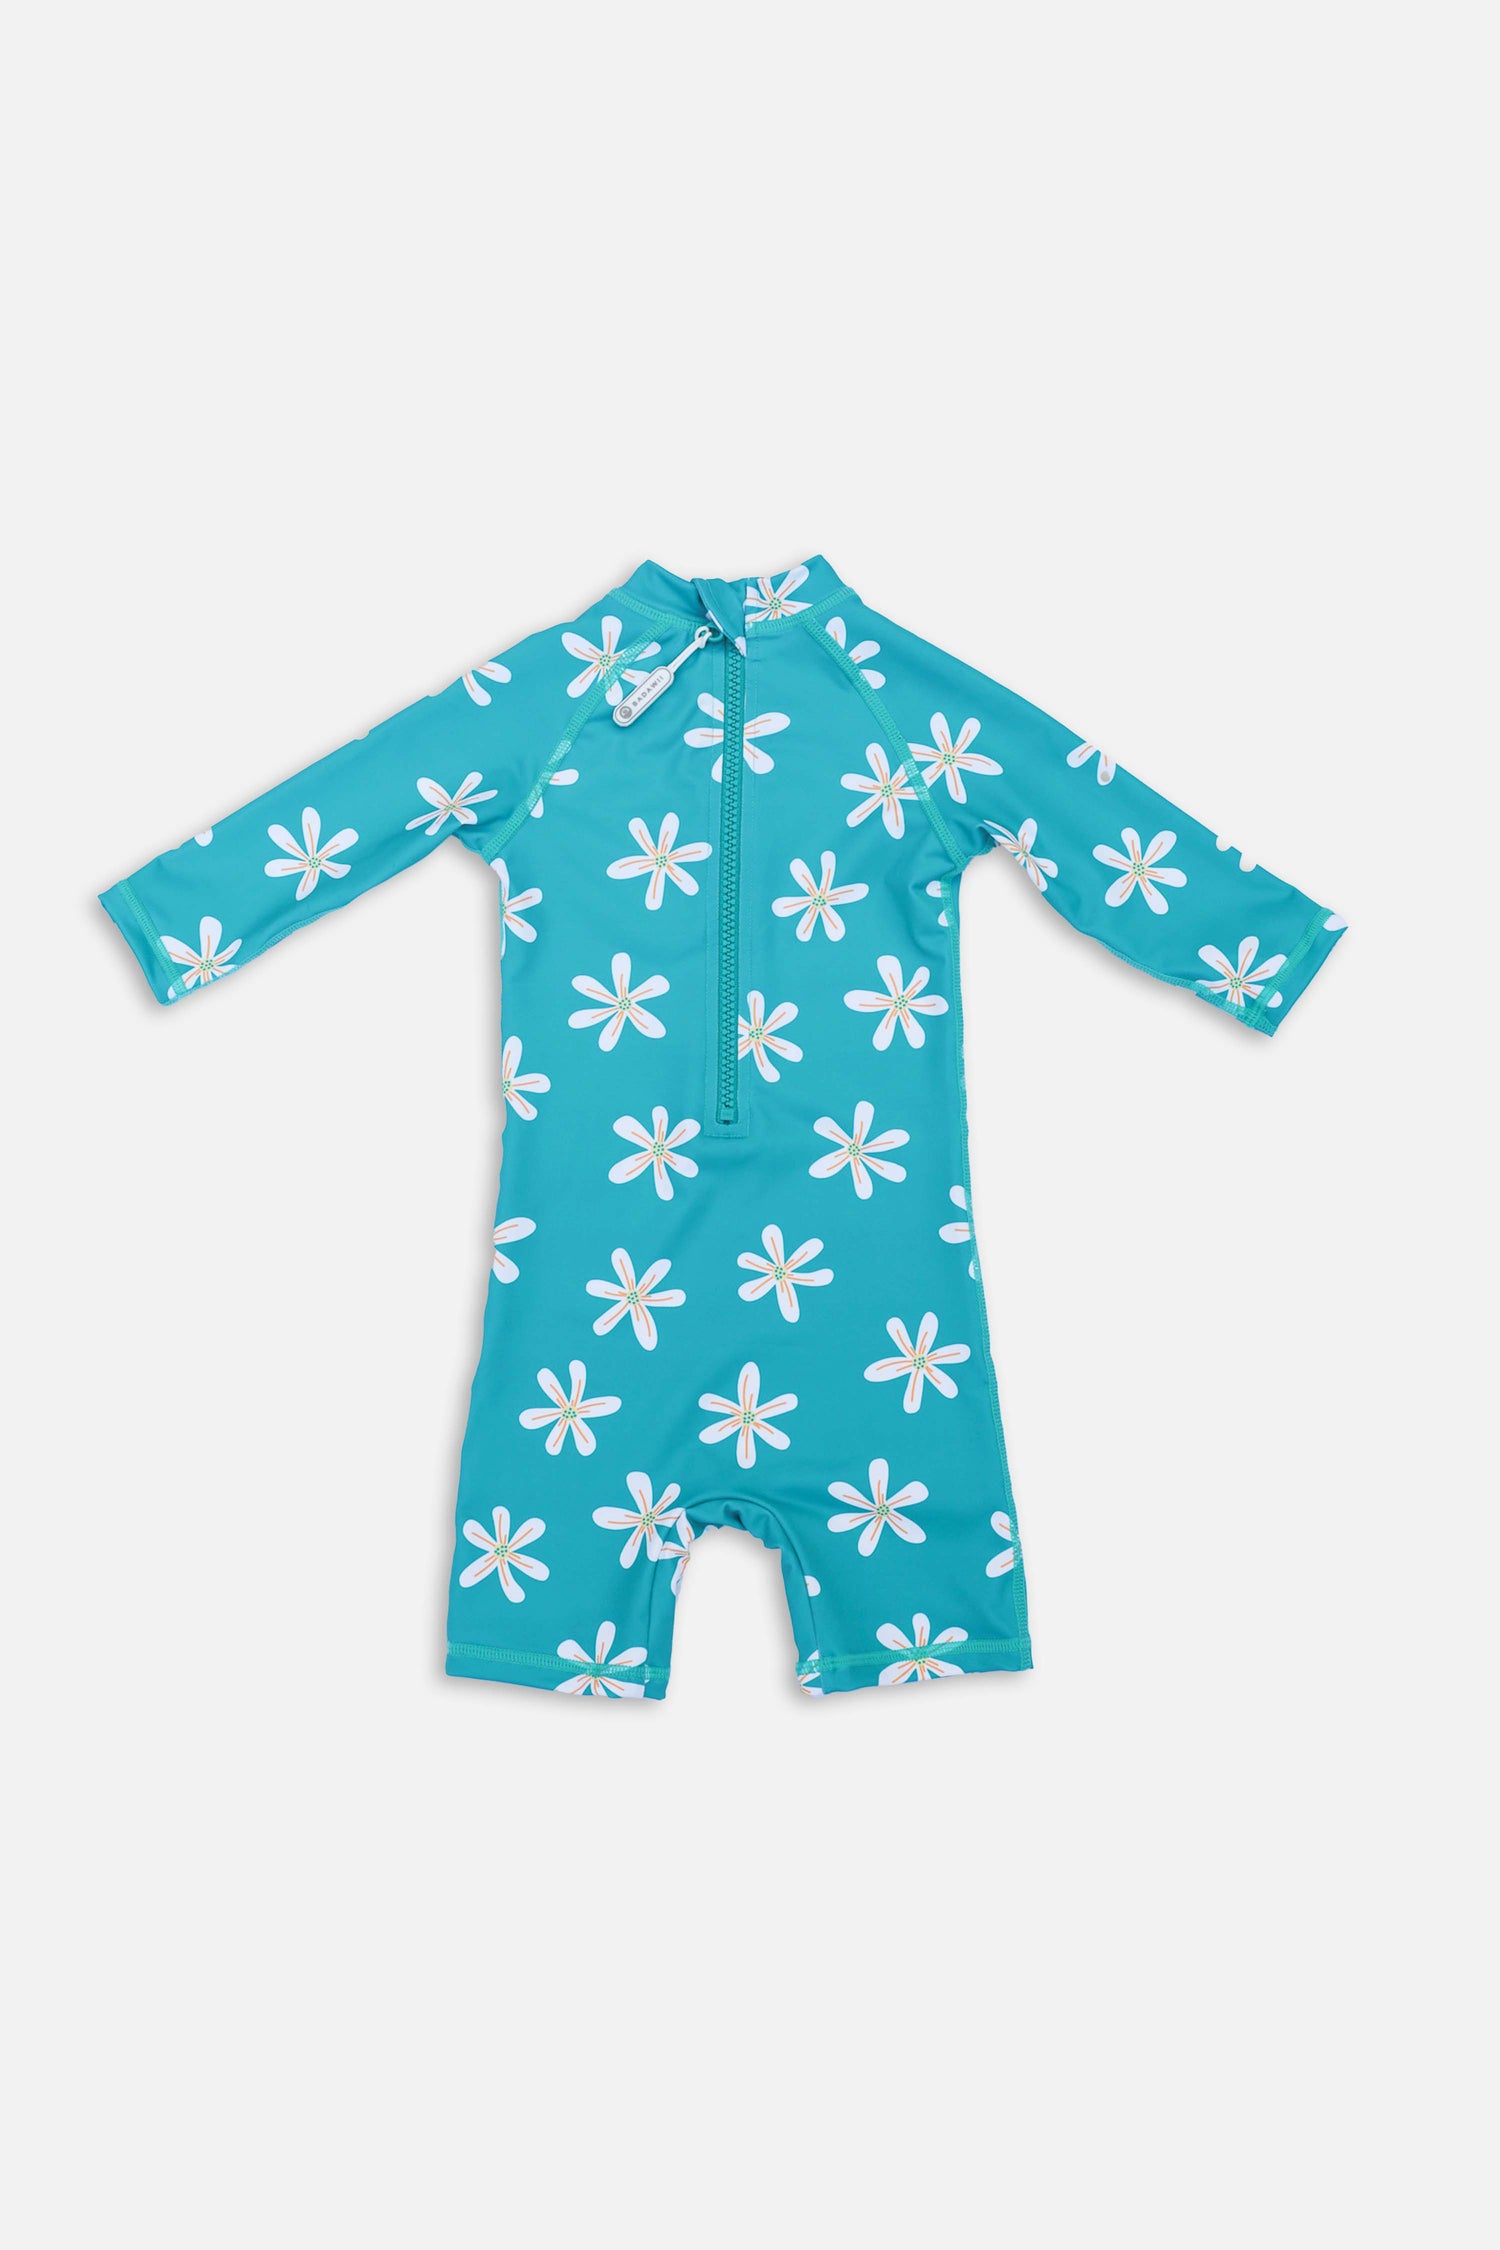 Baby Swimsuit - Tropical Flower